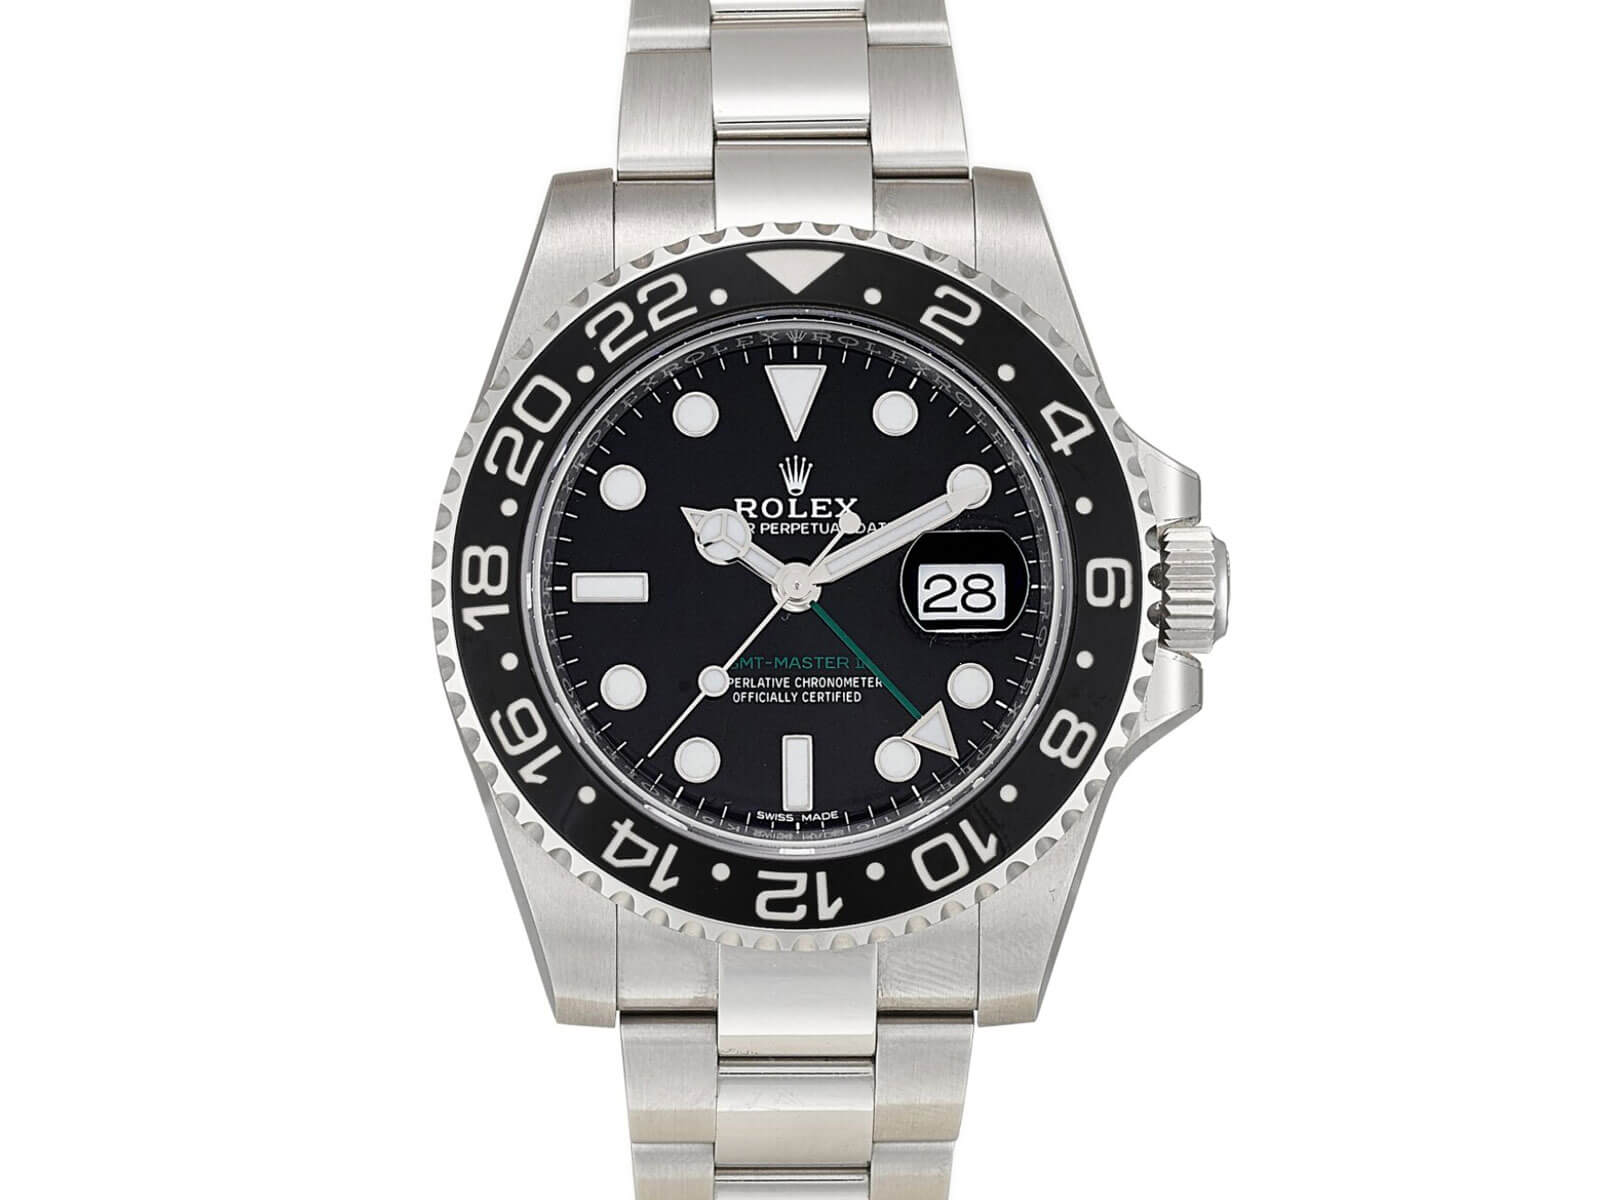 Rolex GMT-Master II 116710 is the first Rolex model with the Parachrom Bleu Hairspring